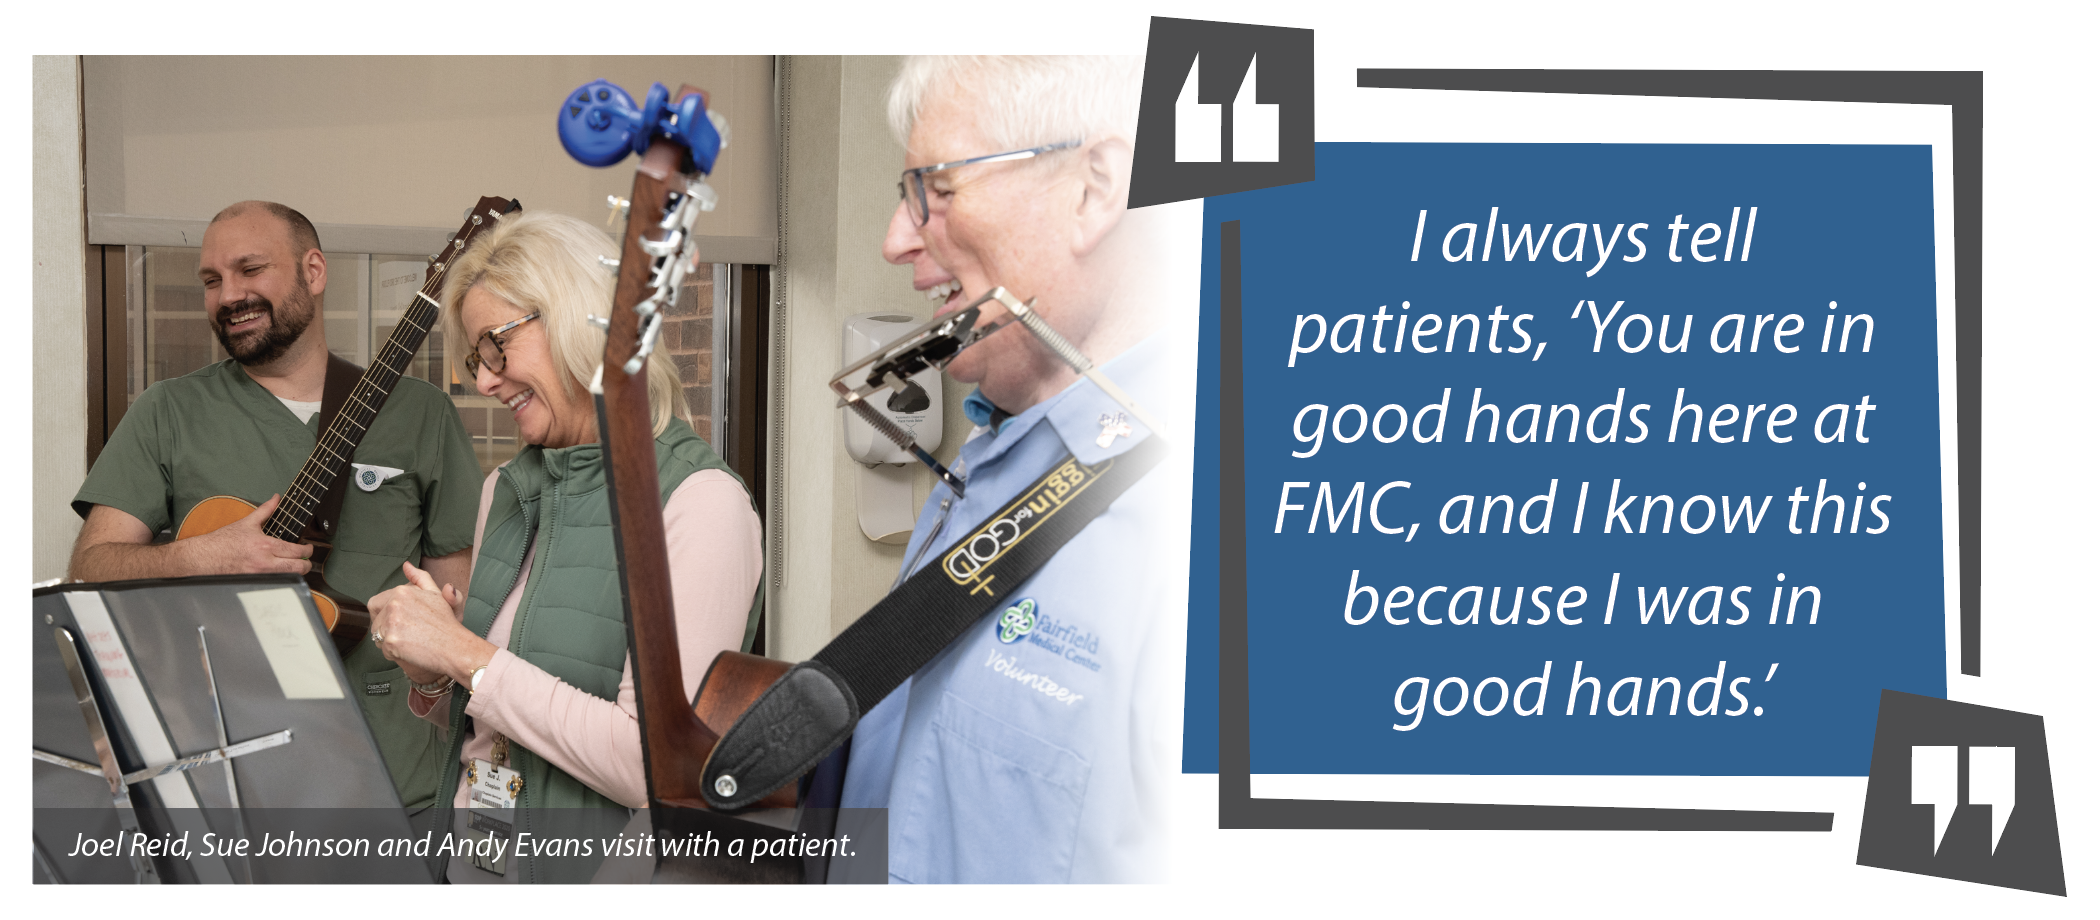 Joel Reid, Sue Johnson and Andy Evans play music for a patient